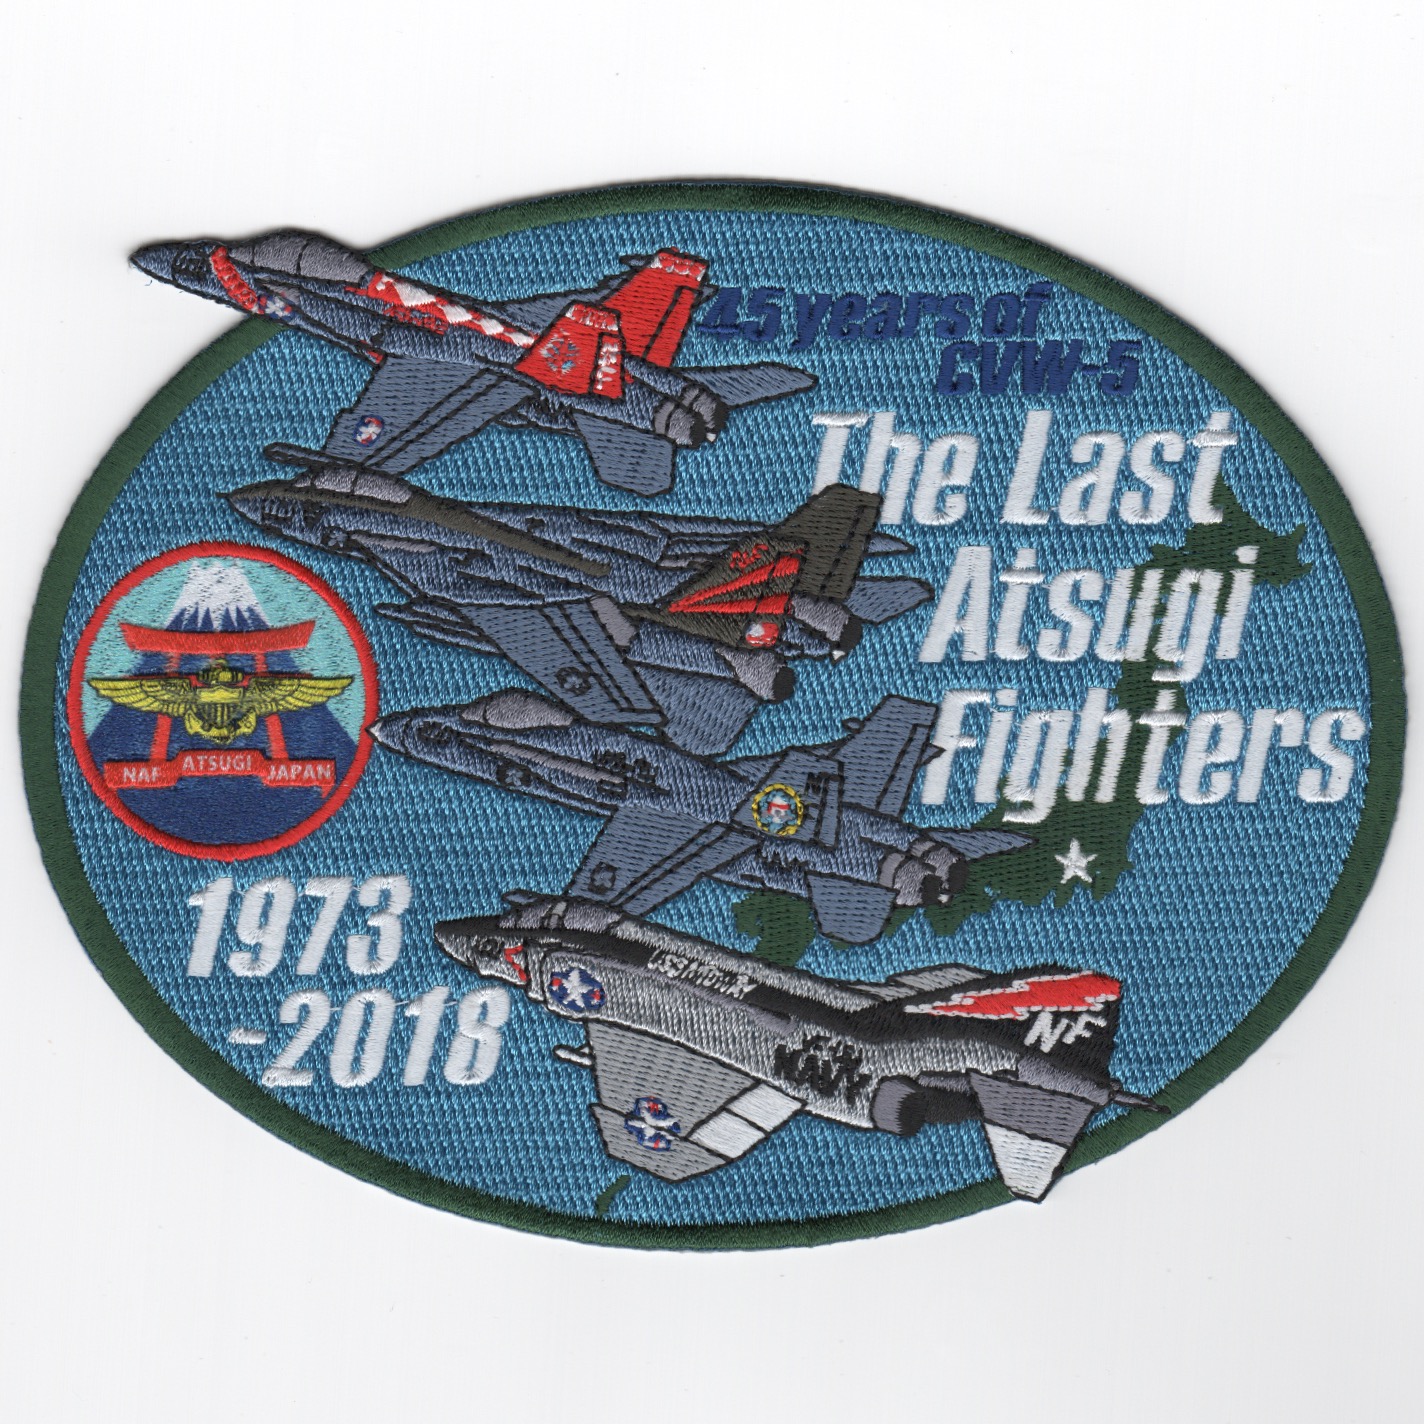 VFA-102 2018 '45 YEARS/Last ATSUGI Fighters' Patch